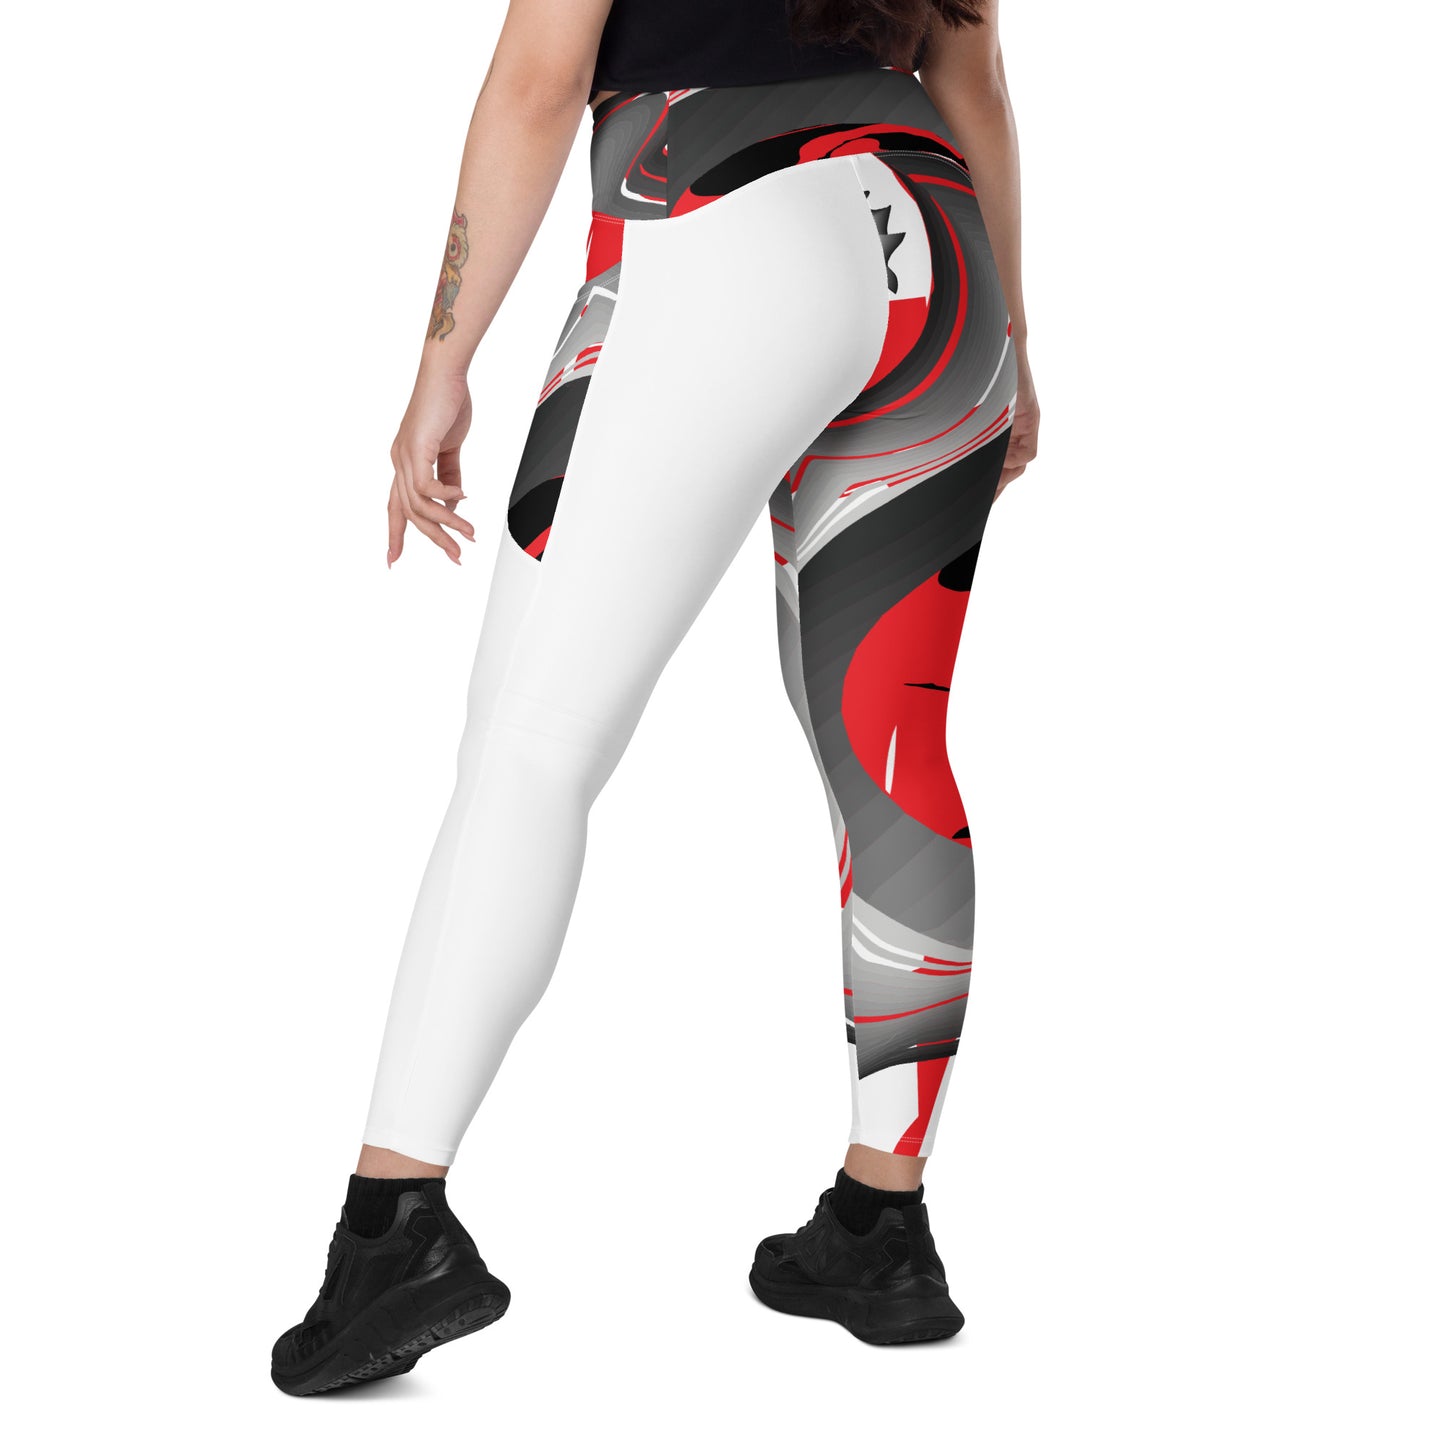 Tupac Legend Crossover Leggings With Pockets